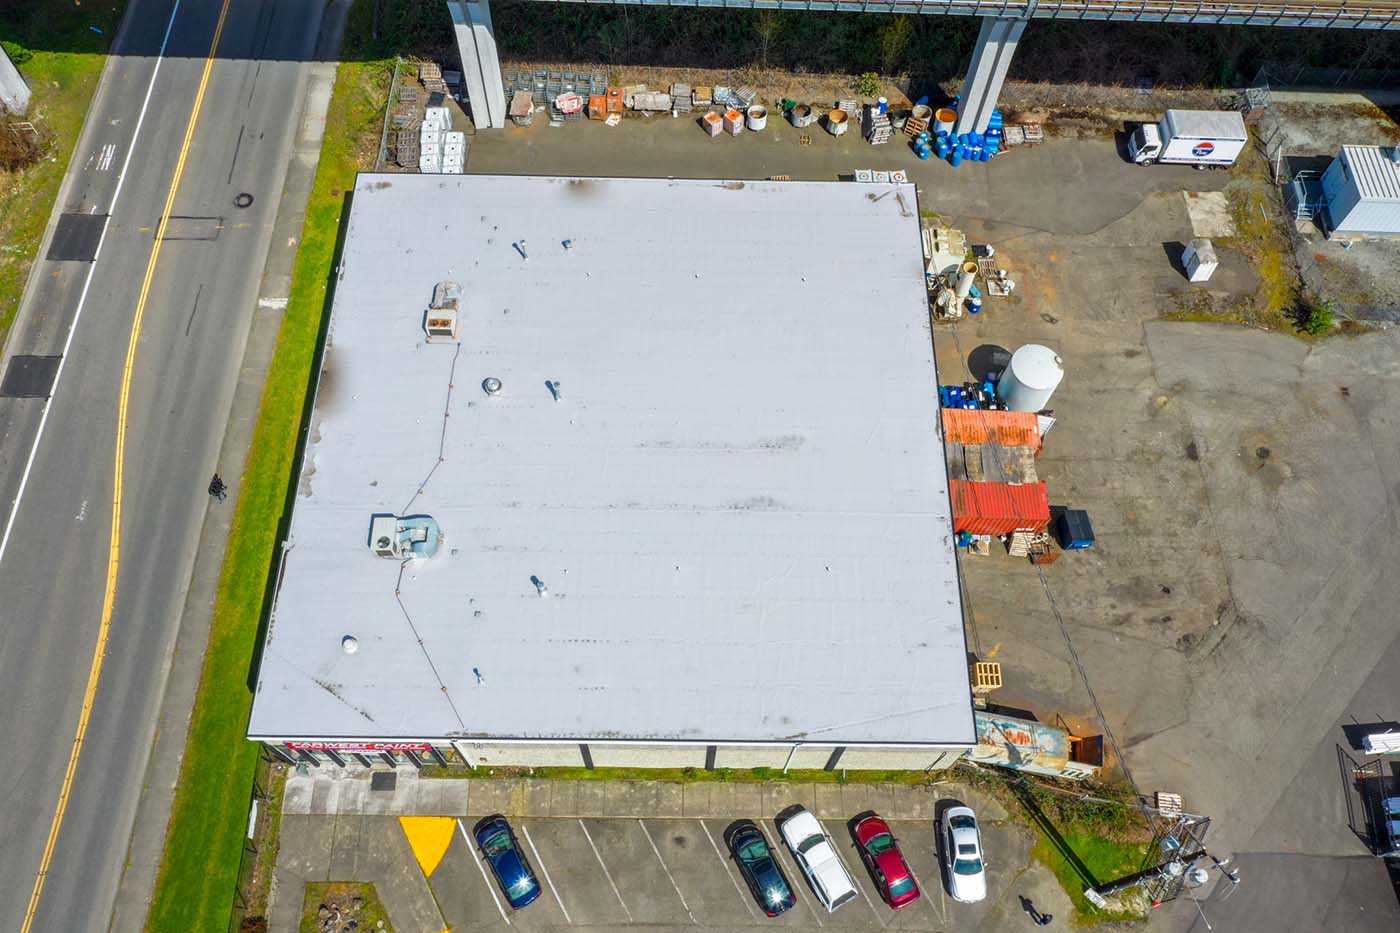 New Flat TPO Roof for Commercial Building in Tukwila, Washington - overhead view of roof